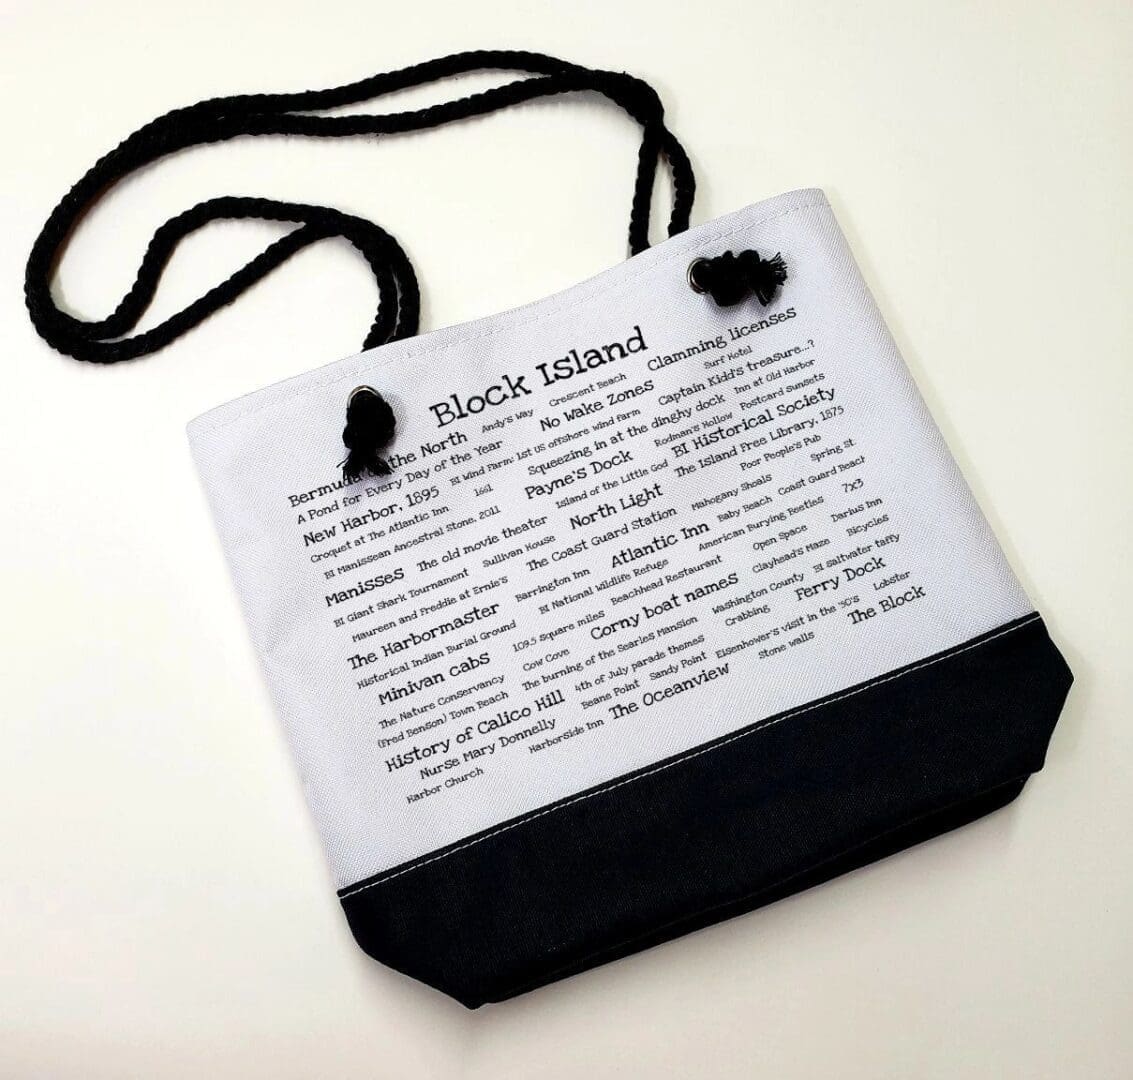 A bag with a black strap and white paper.